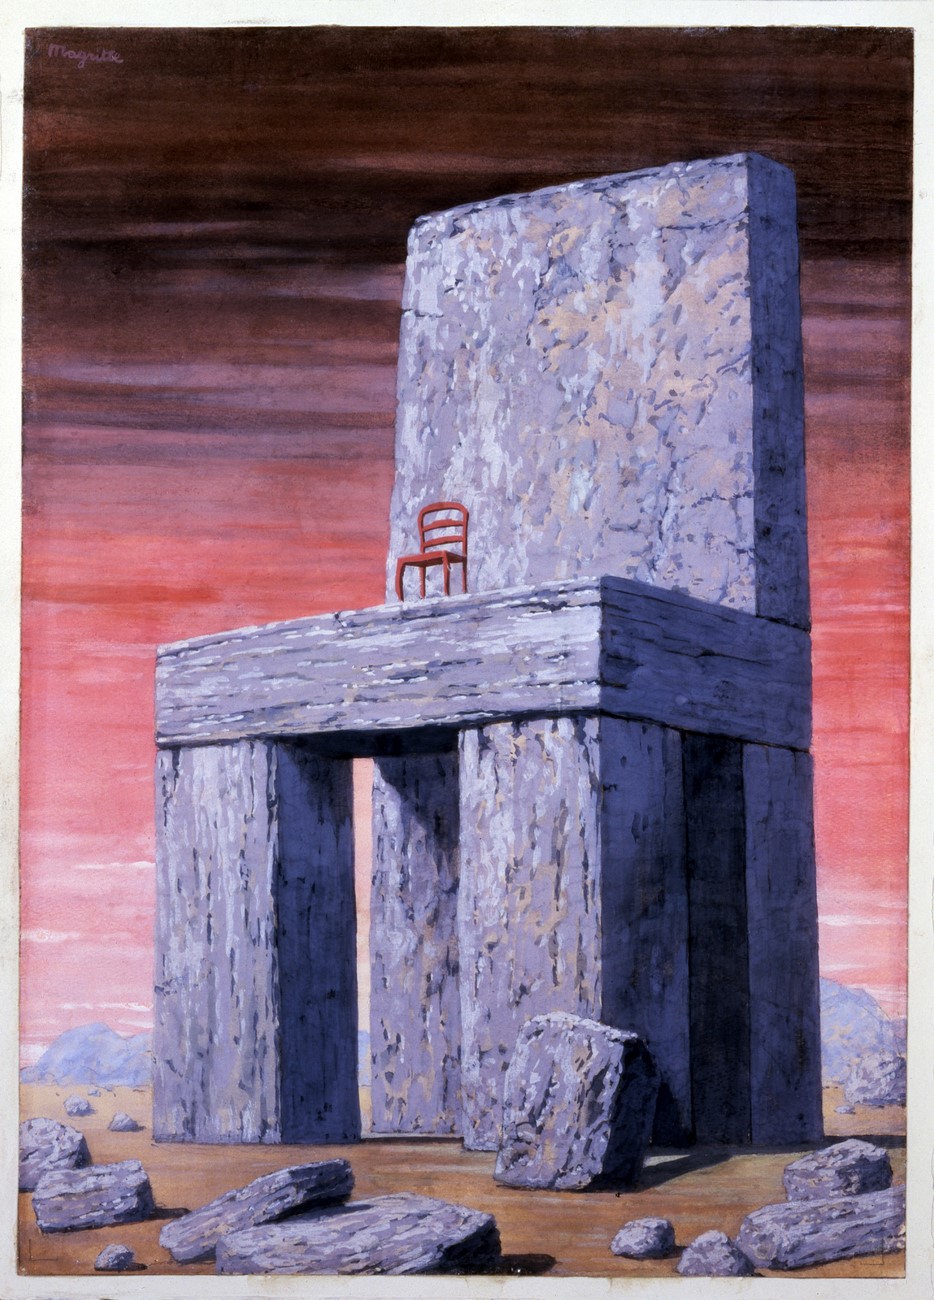 Fig. 10 – René Magritte, "Those who cannot remember the past are condemned to repeat it." – George Santayana, The Life of Reason; 1905, From the series: Great Ideas of Western Man ca.. 1962; gouache and pencil on paper mounted on paperboard. 34.0 x 24.2 cm, Smithsonian American Art Museum, Gift of Container Corporation of America, 1984.124.194 .